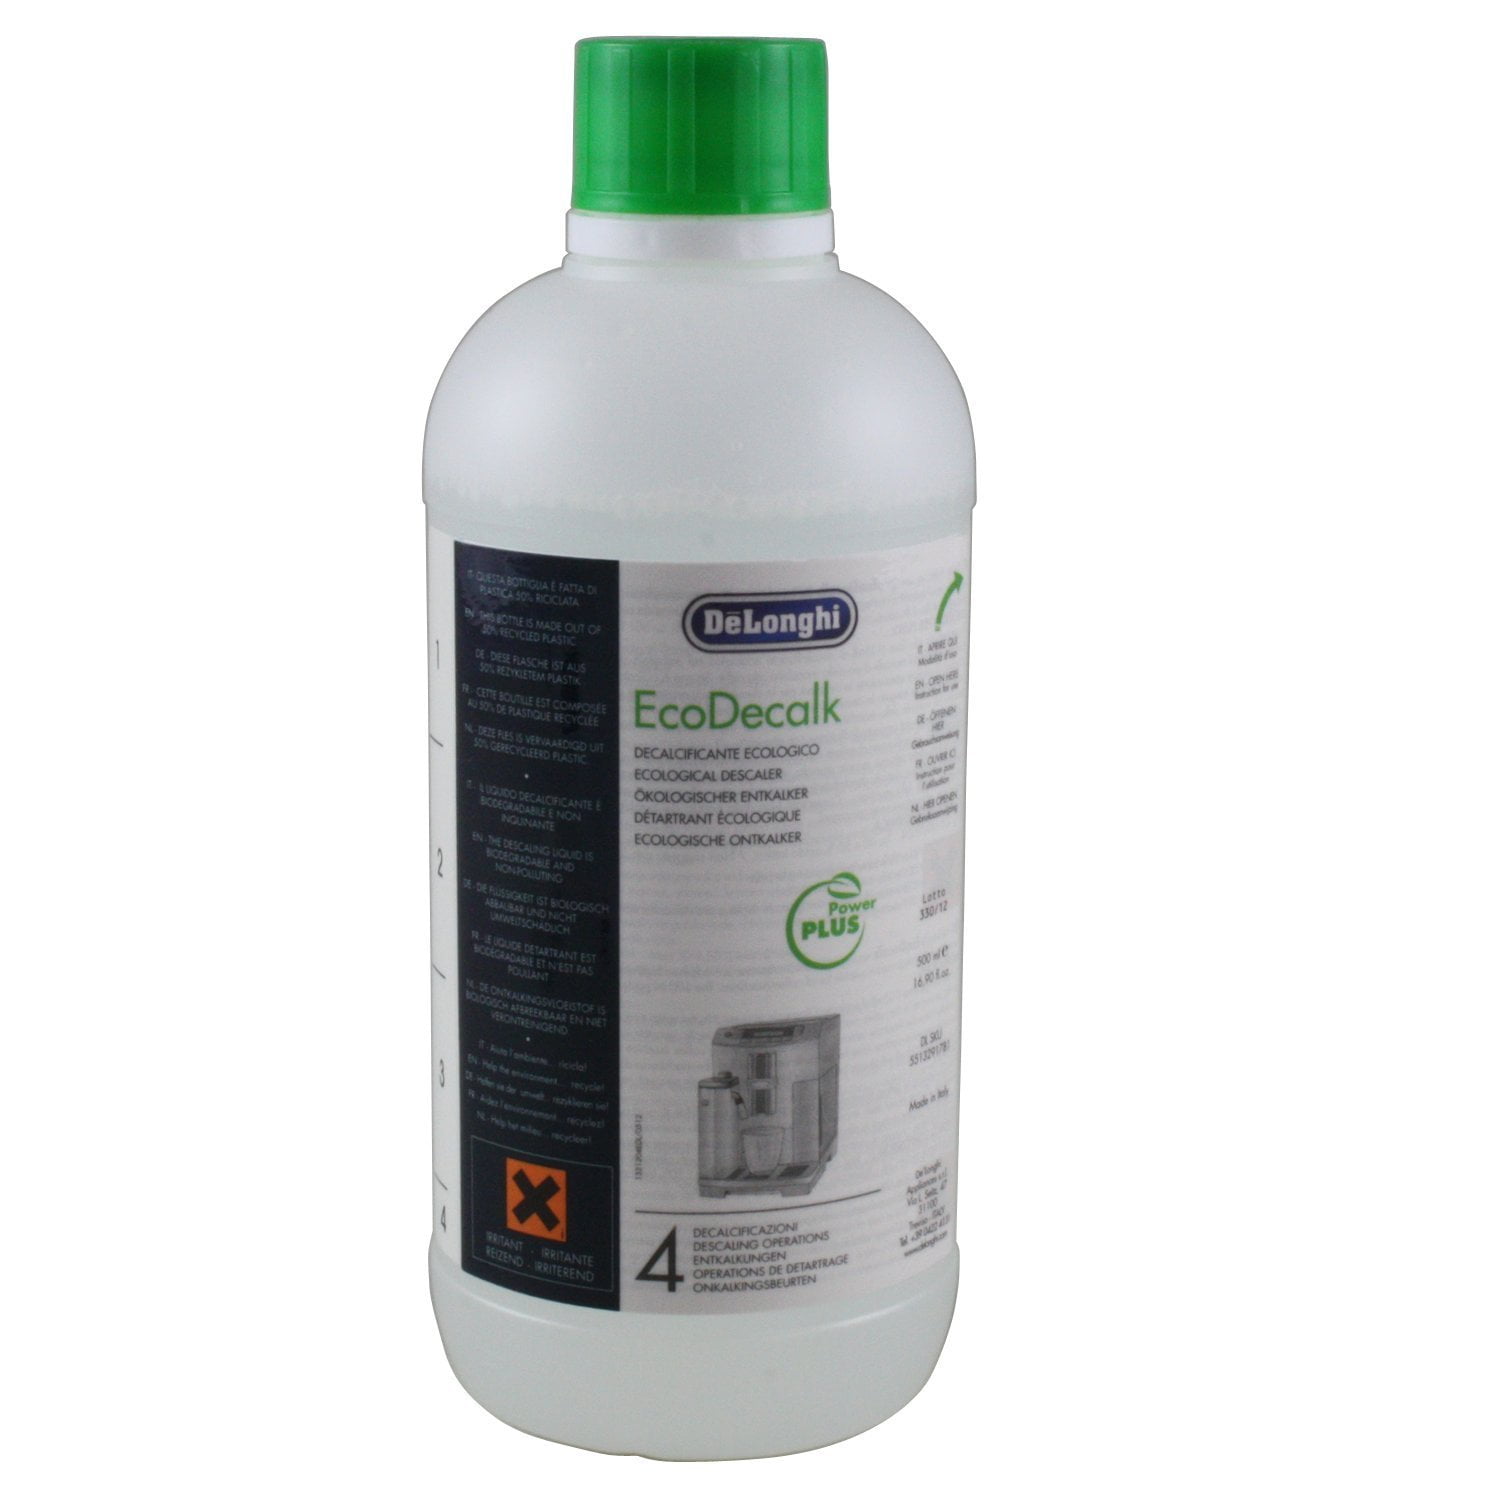 Fruit vegetables accurately Telegraph De'Longhi EcoDeCalk Natural Descaler Cleaner for Coffee Machines 0.5L -  Walmart.com